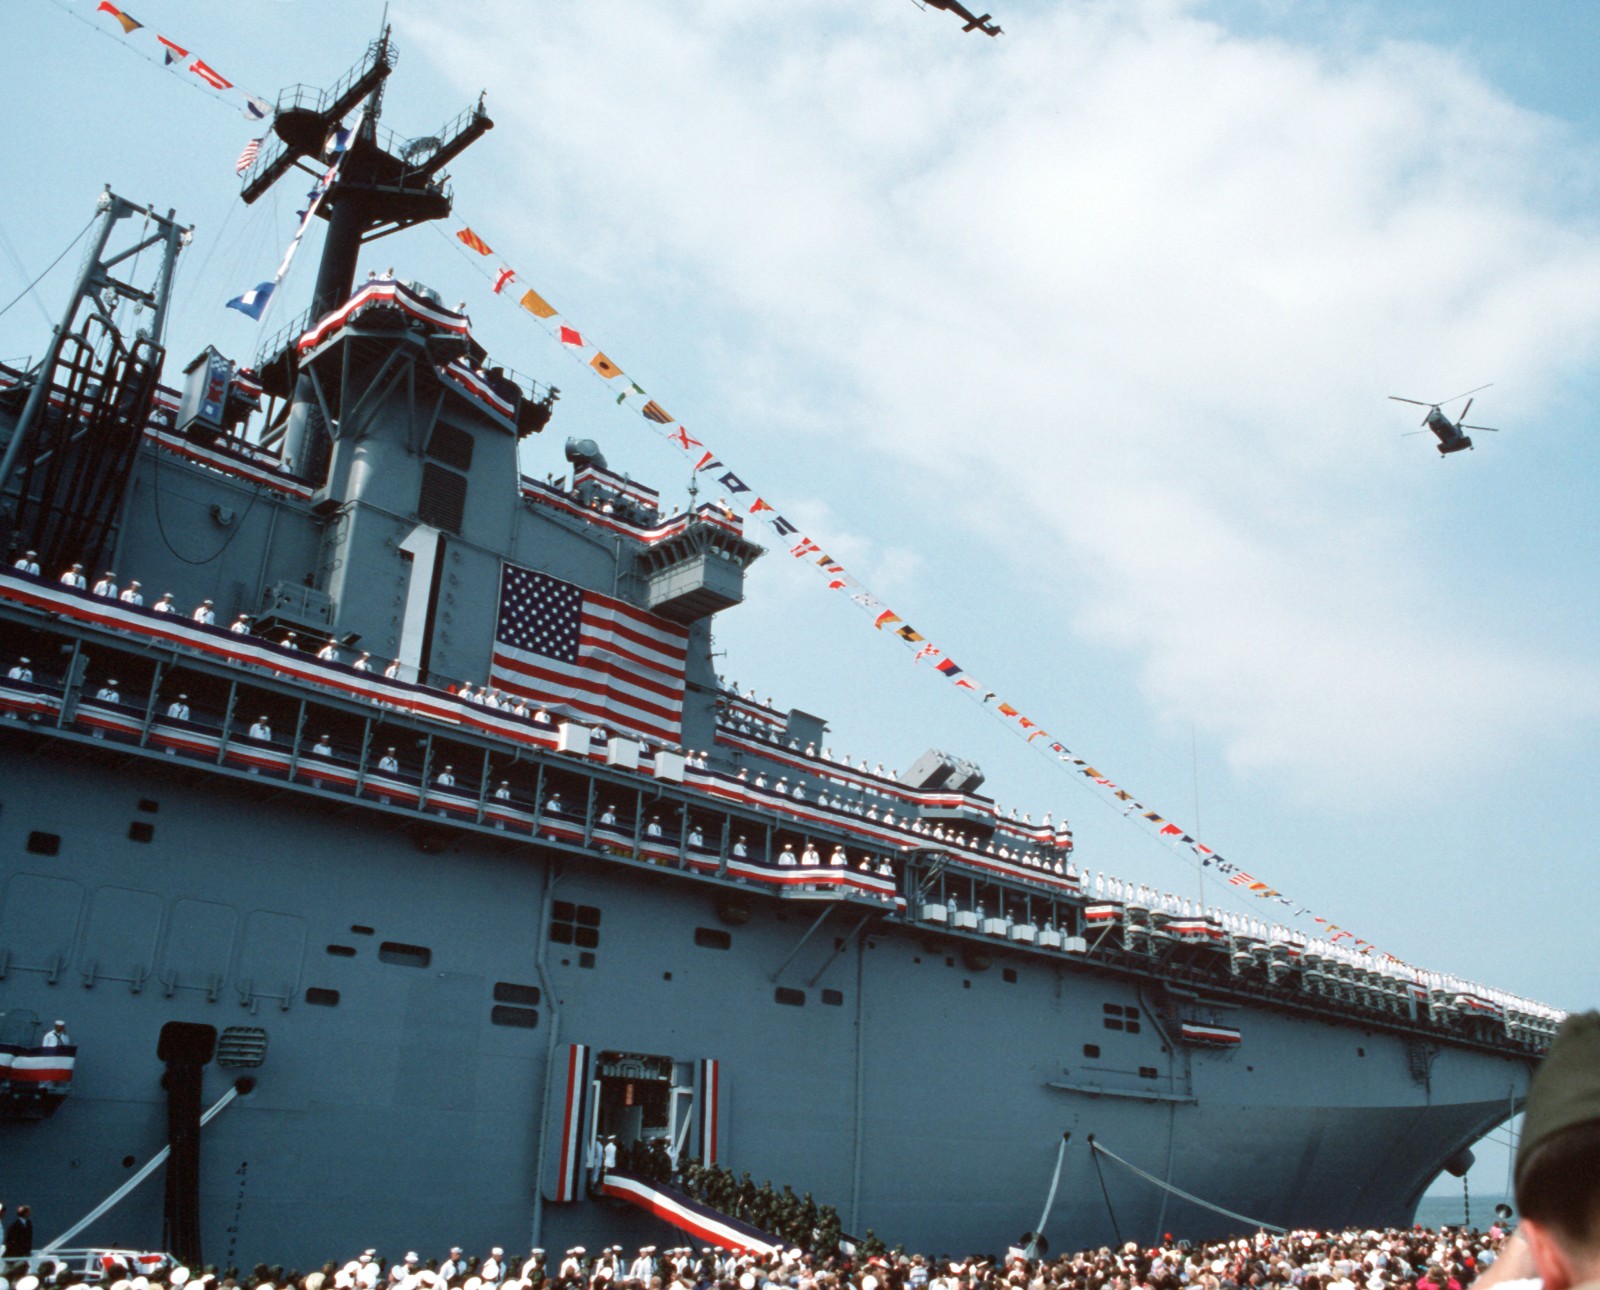 lhd-1 uss wasp amphibious assault landing ship dock helicopter us navy commissioning ceremony norfolk 46